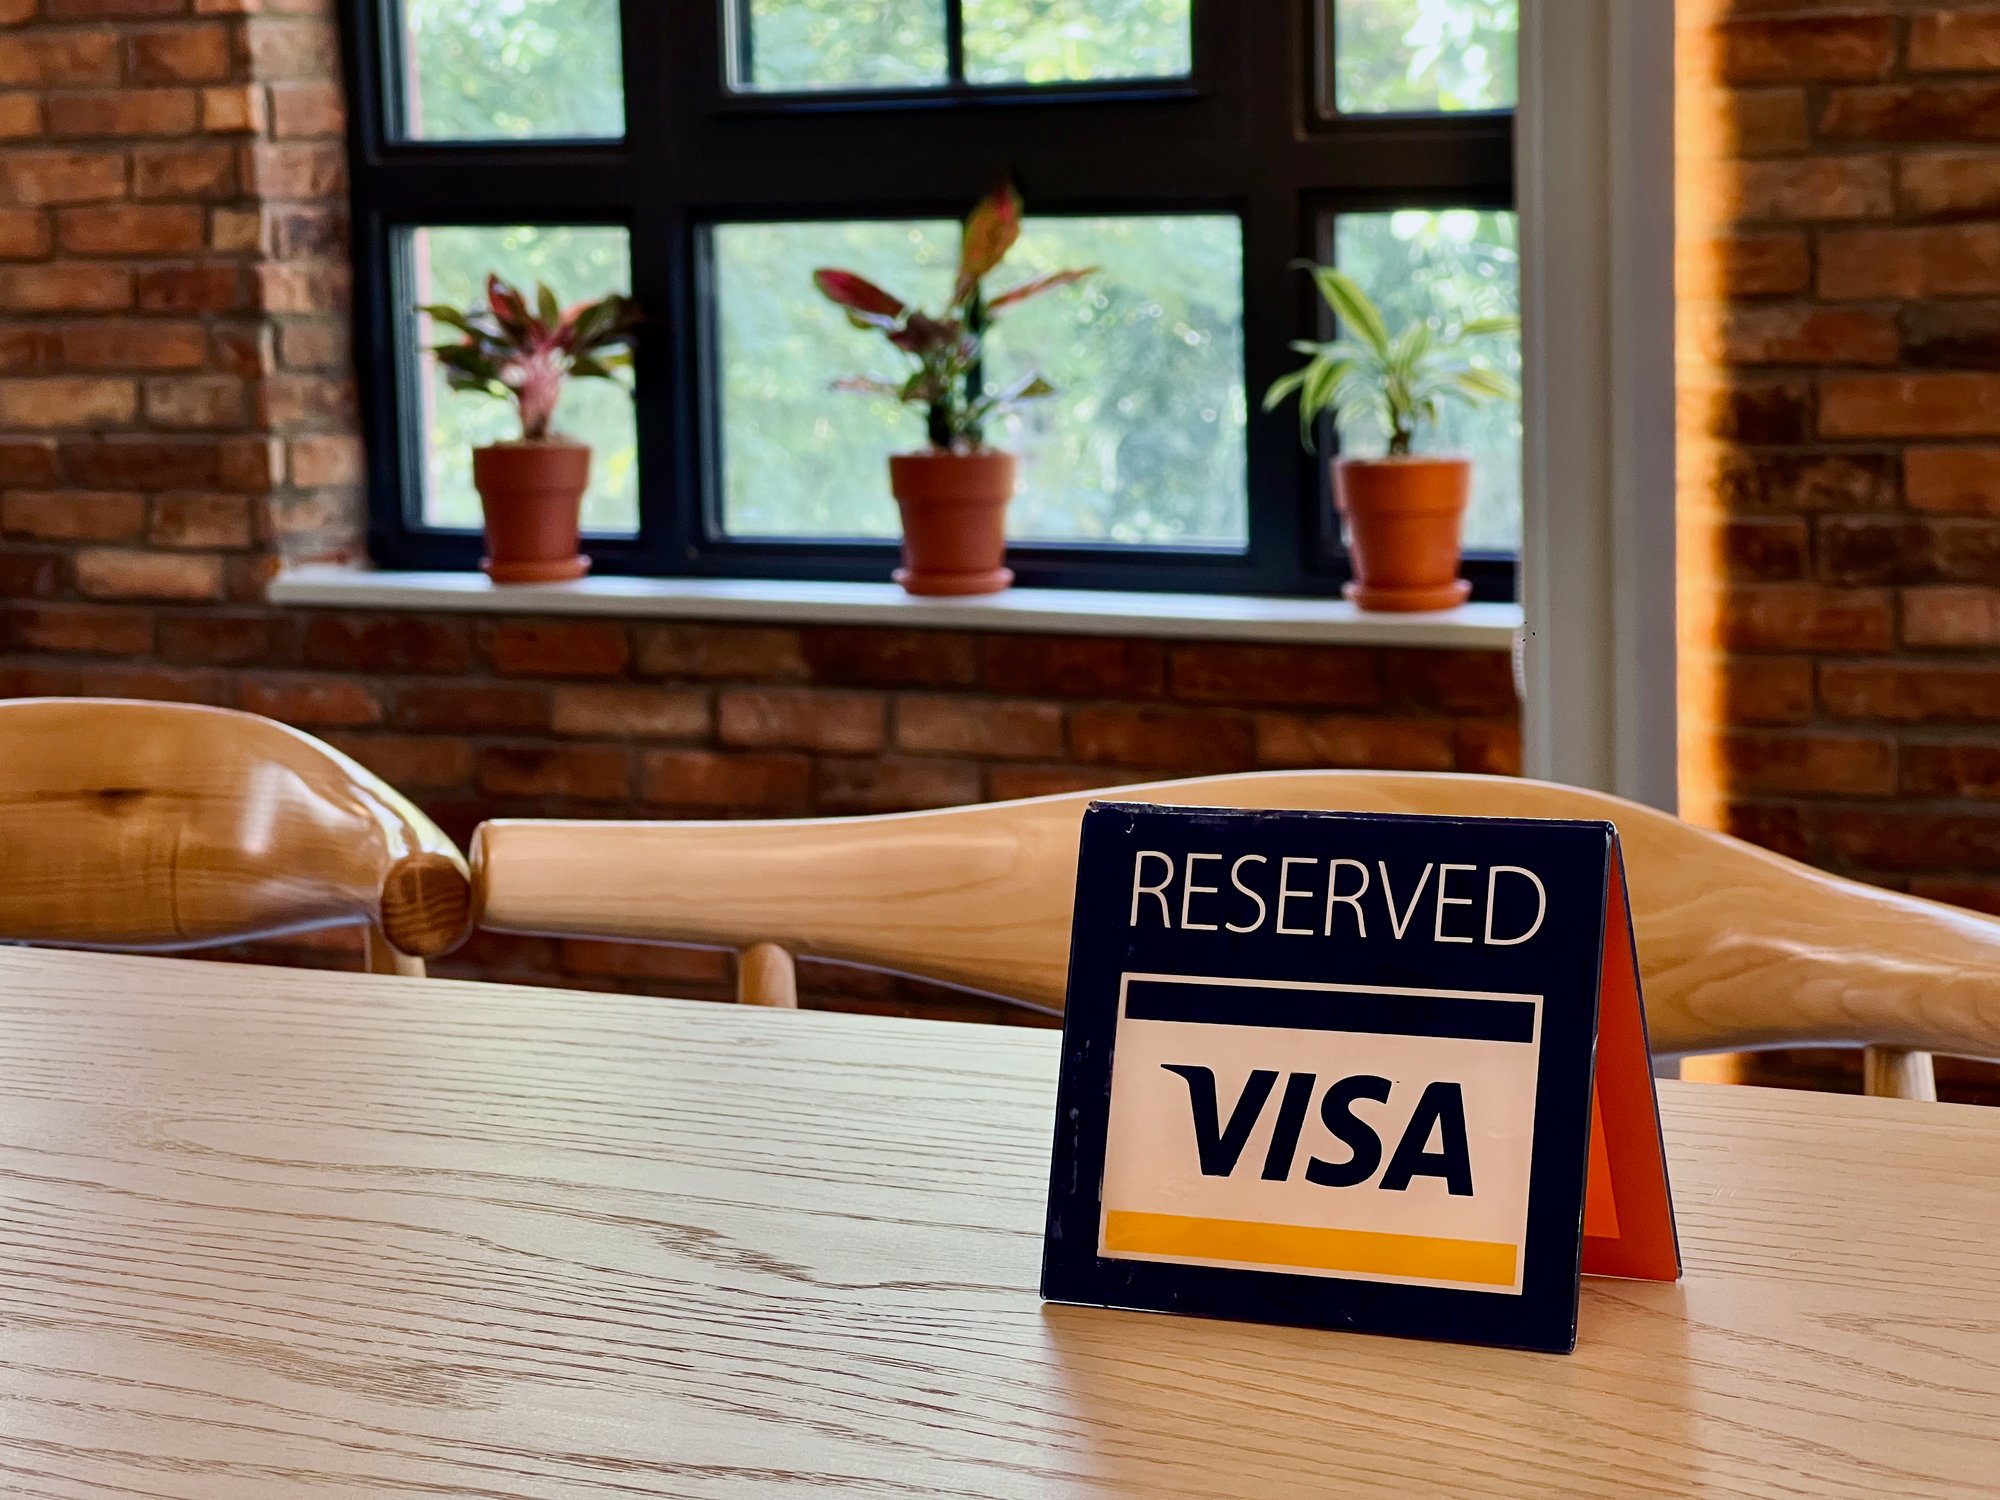 A reserved table by VISA